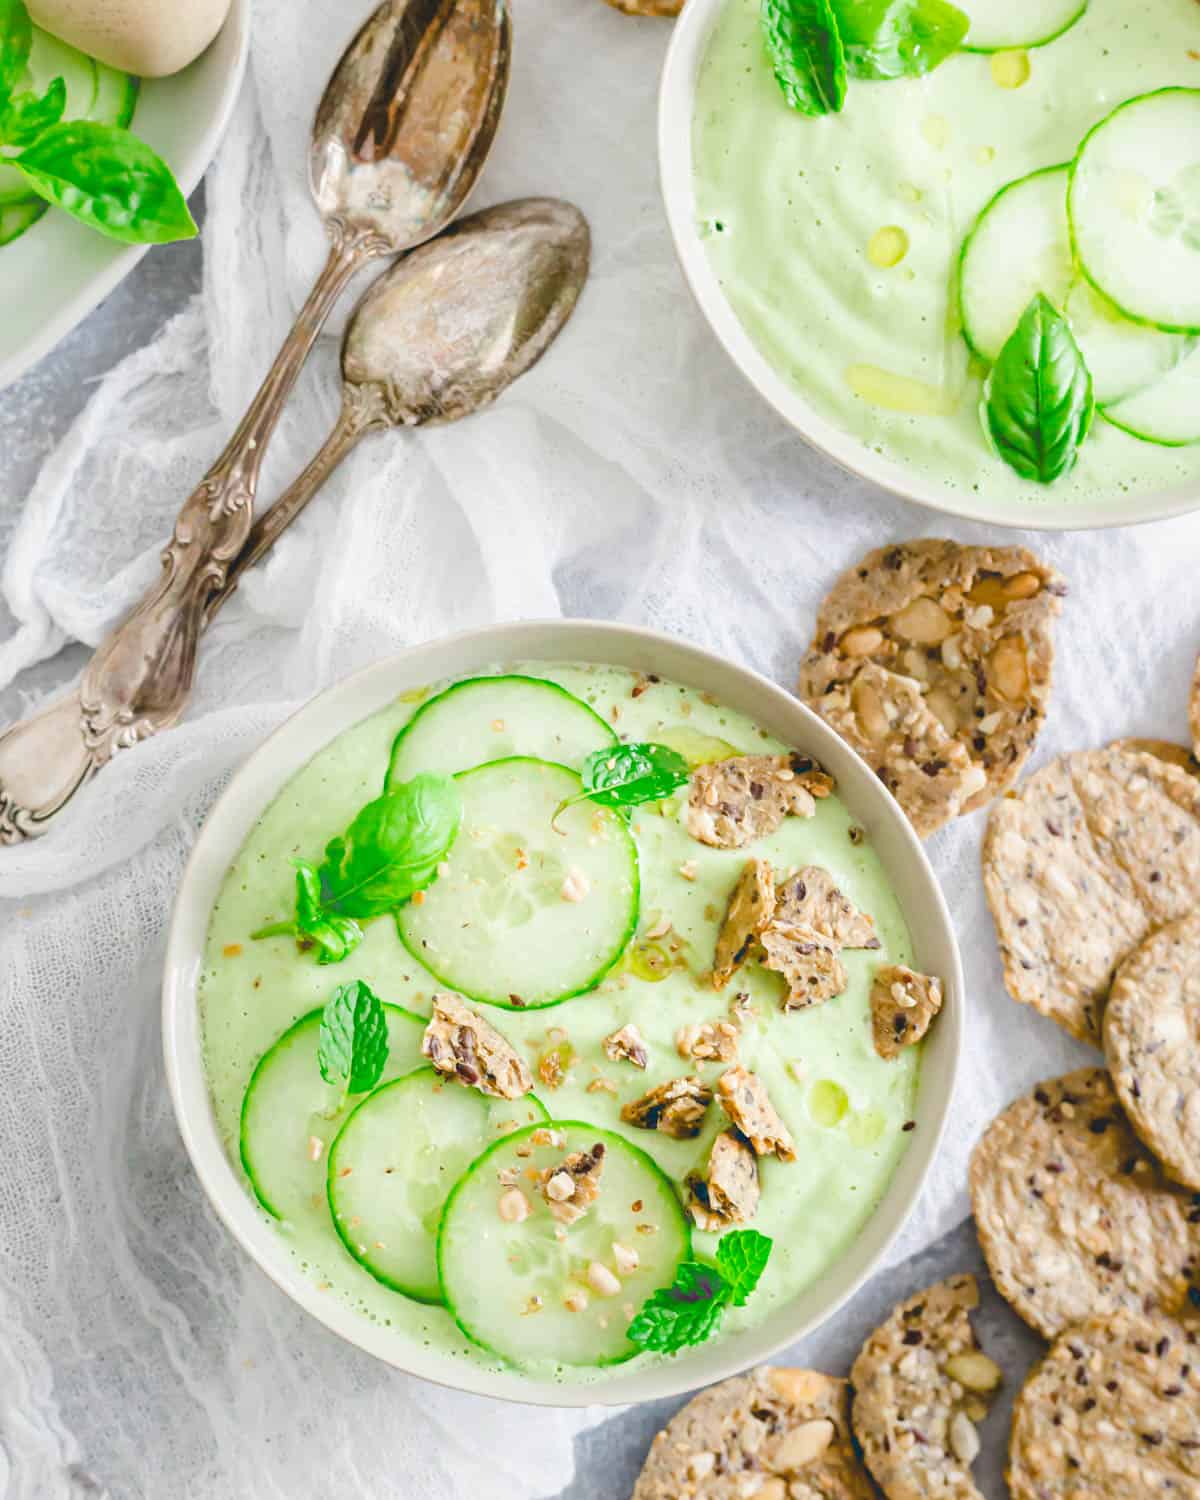 Crunchy crackers crumbled on top of cucumber gazpacho in small bowls.